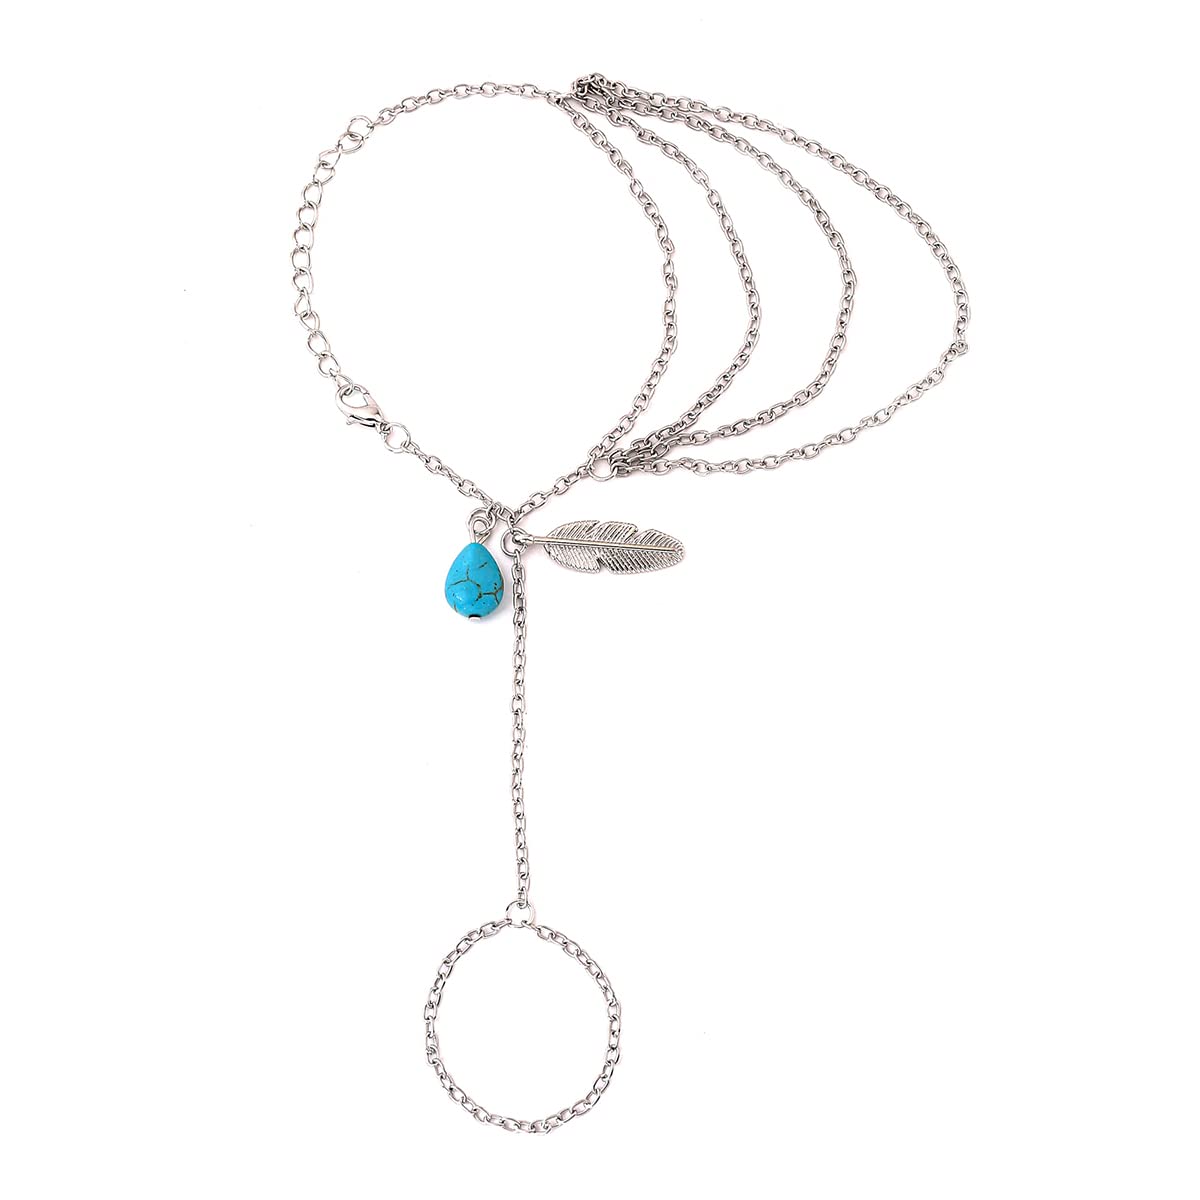 Yellow Chimes Hand Chain For Women Multilayer Silver Plated Blue Stone Feather Charm Hanging Hand Chain For Women and Girls